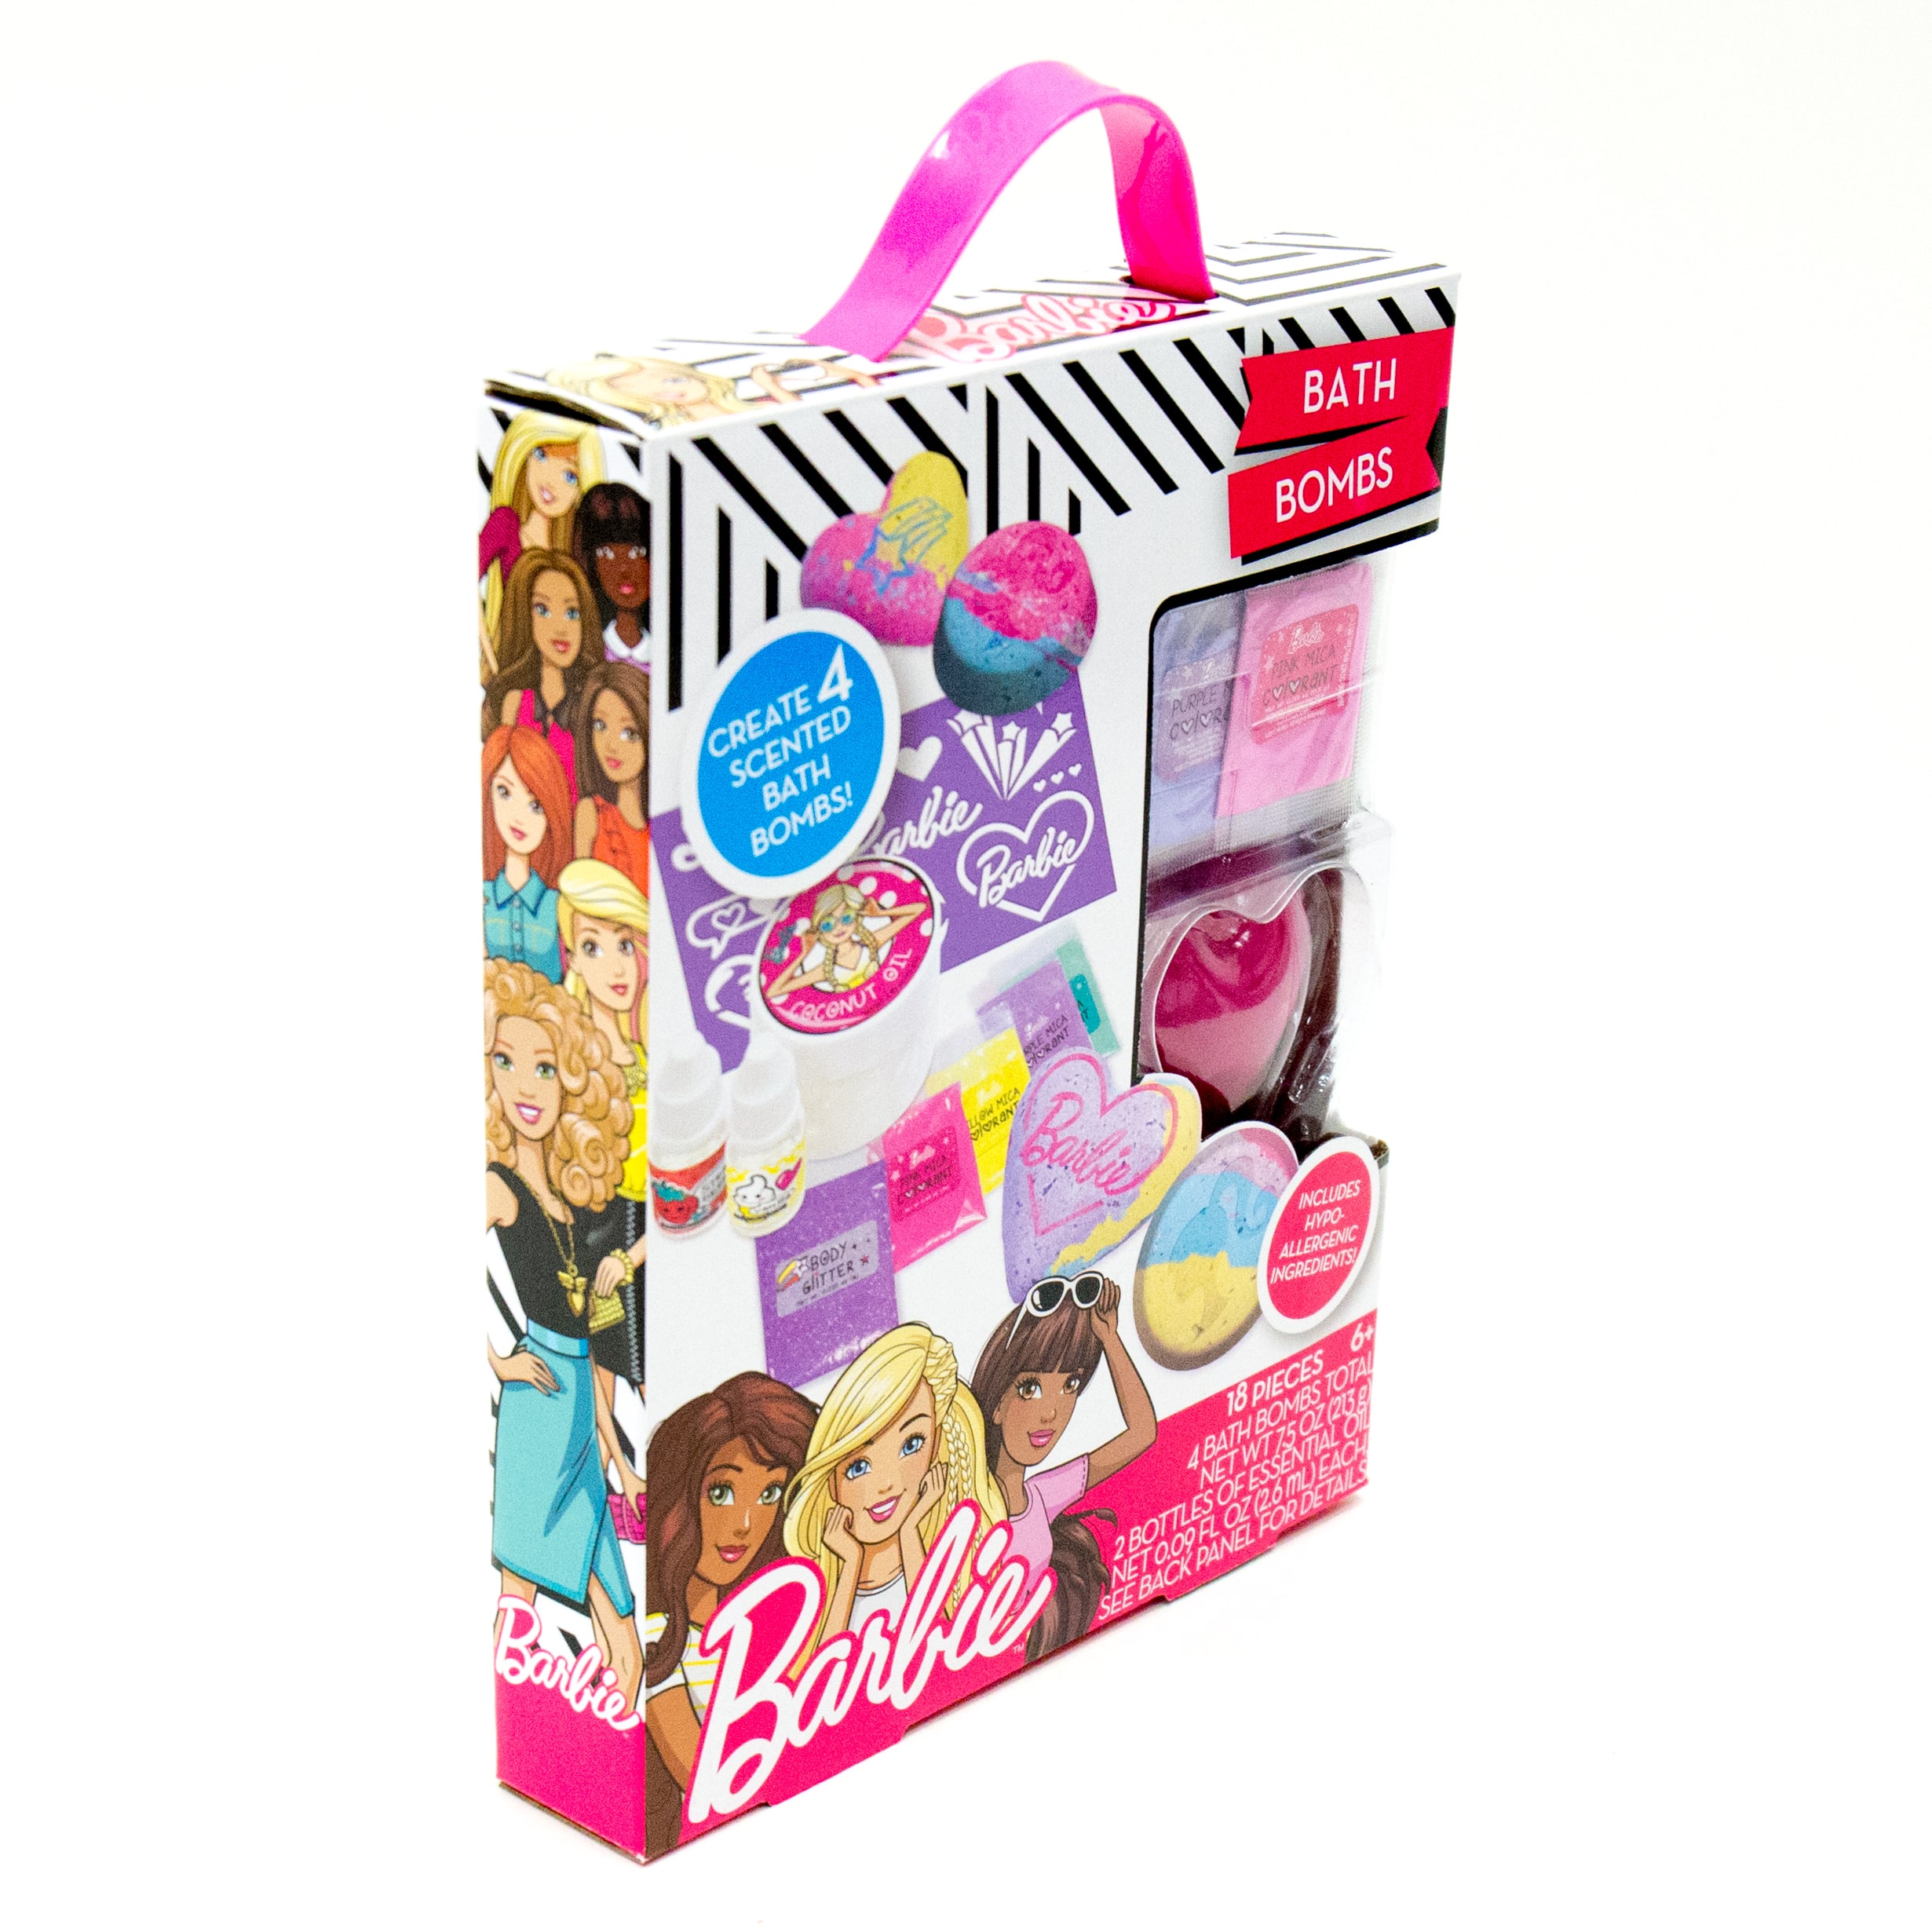 Buy the Barbie® Make Your Own Bath Bomb Kit at Michaels